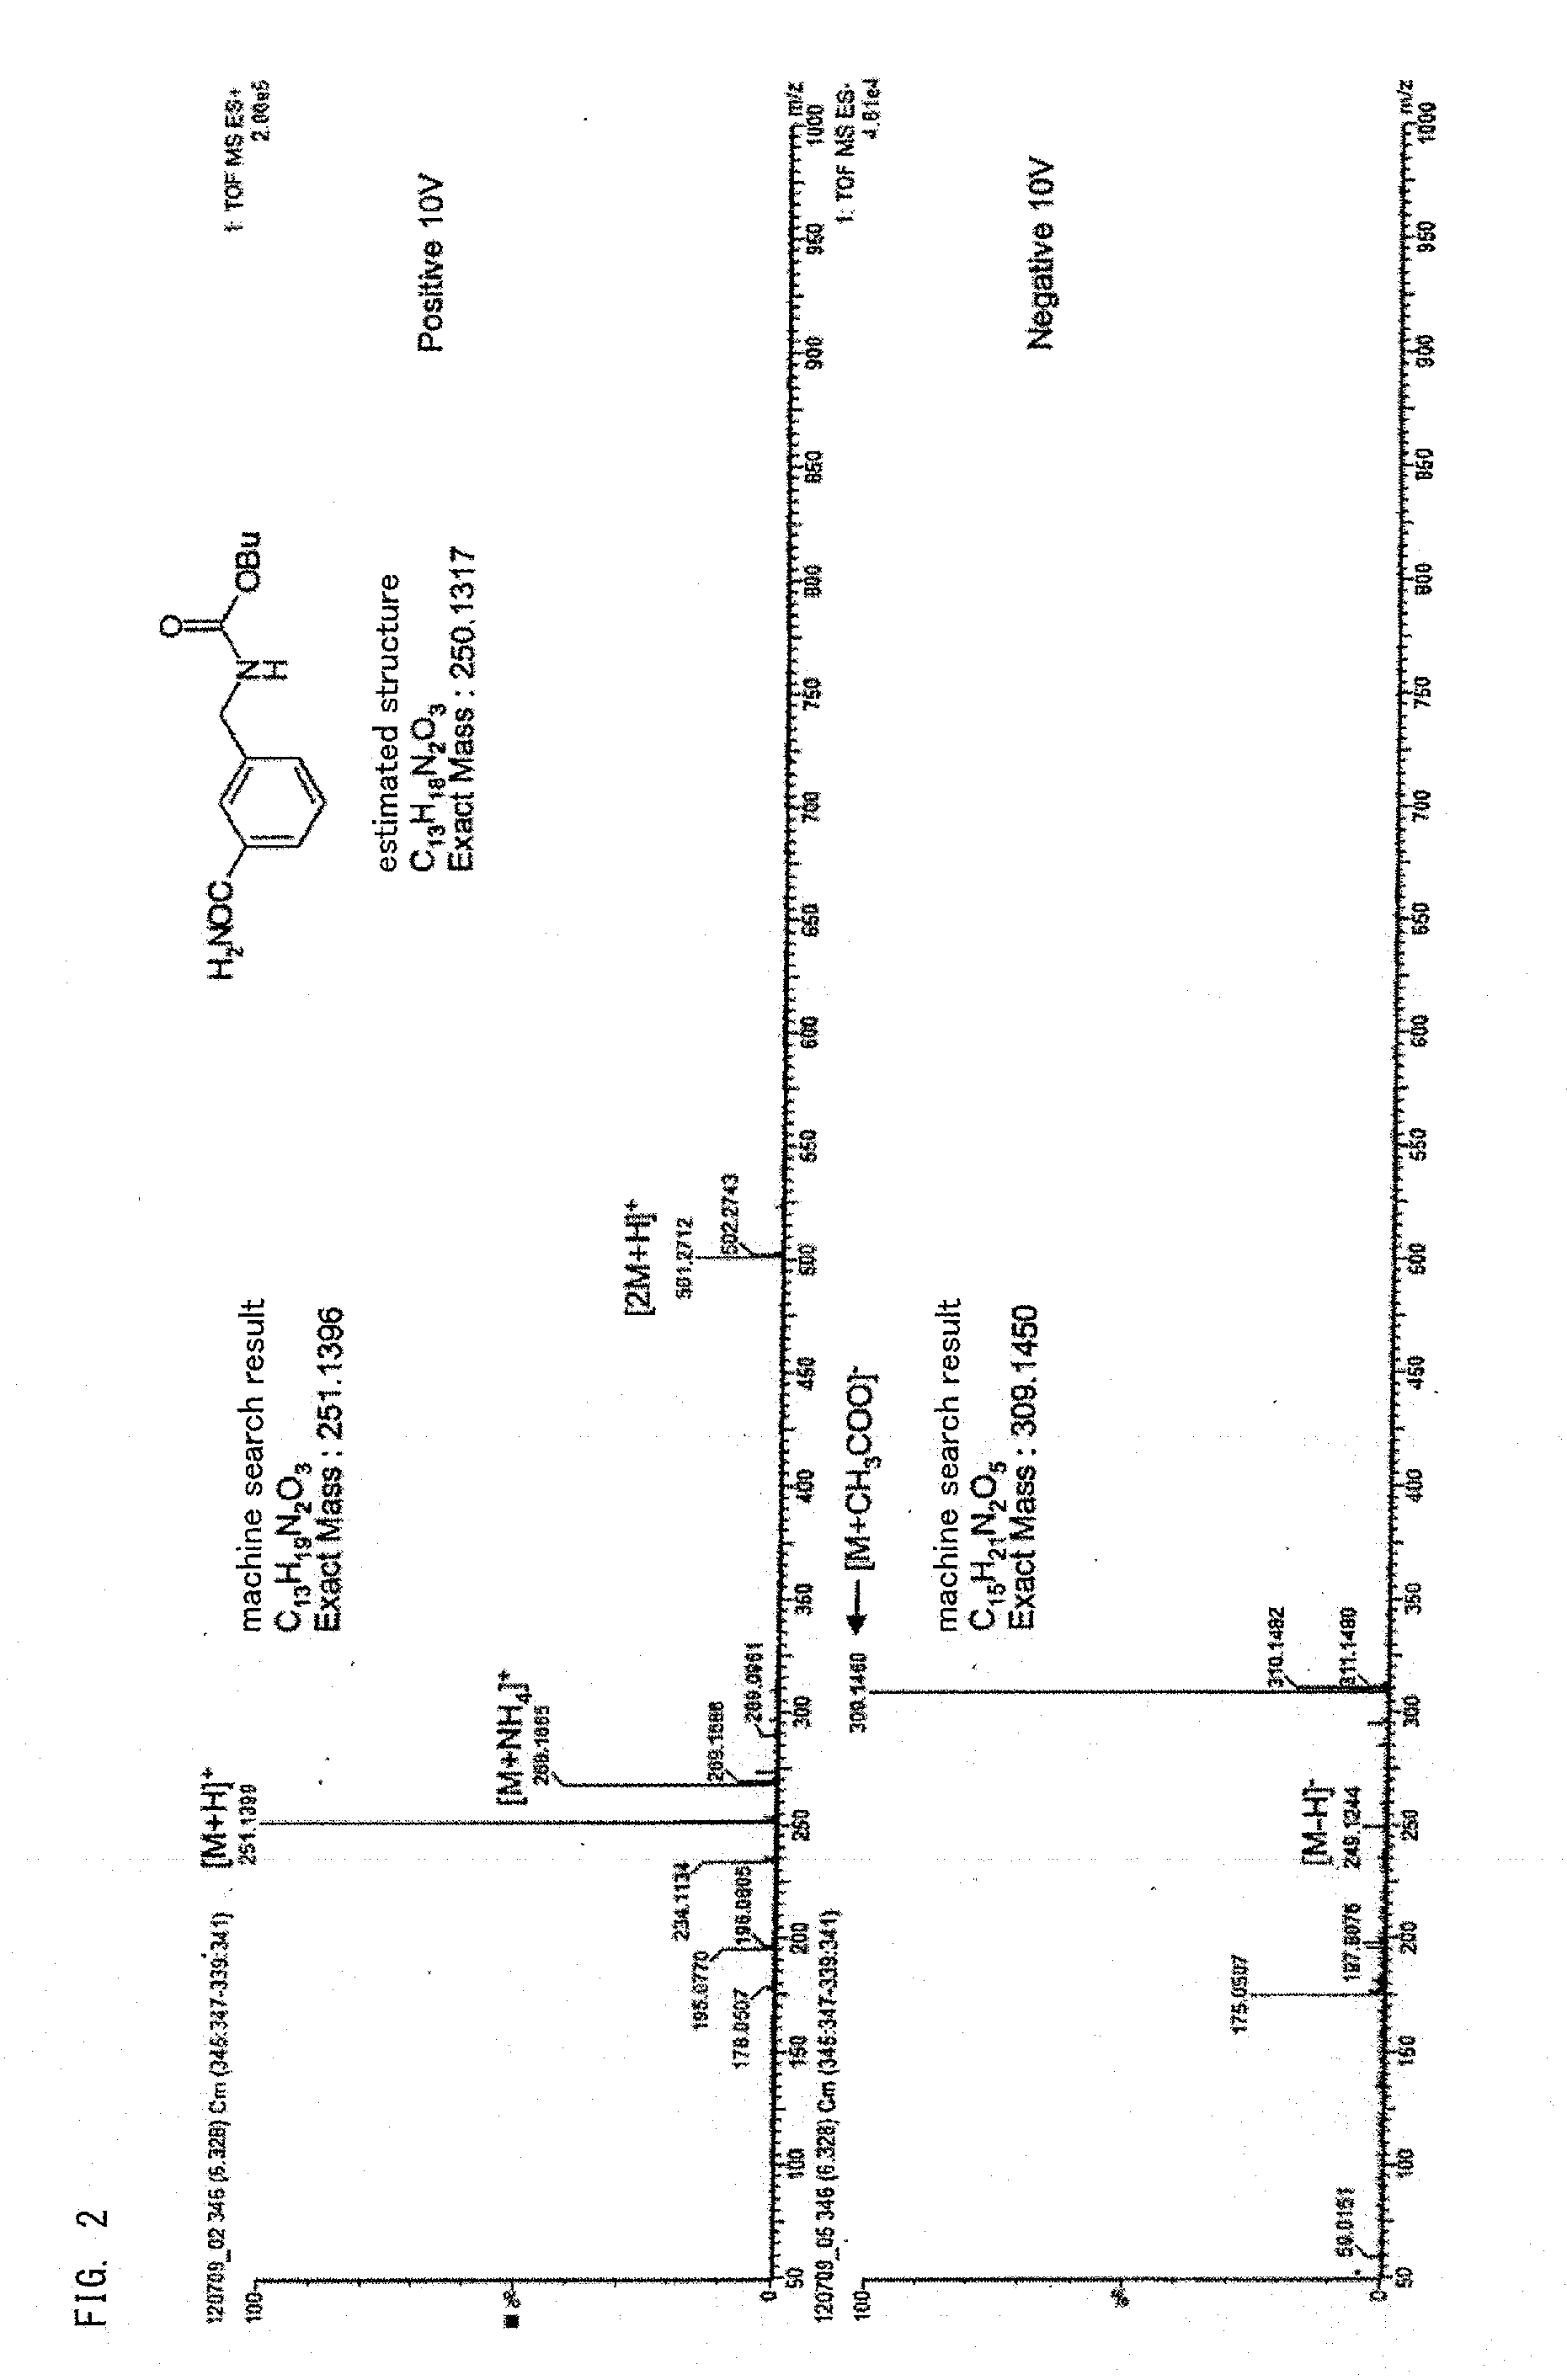 Xylylene dicarbamate, method for producing xylylene diisocyanate, xylylene diisocyanate, and method for reserving xylylene dicarbamate